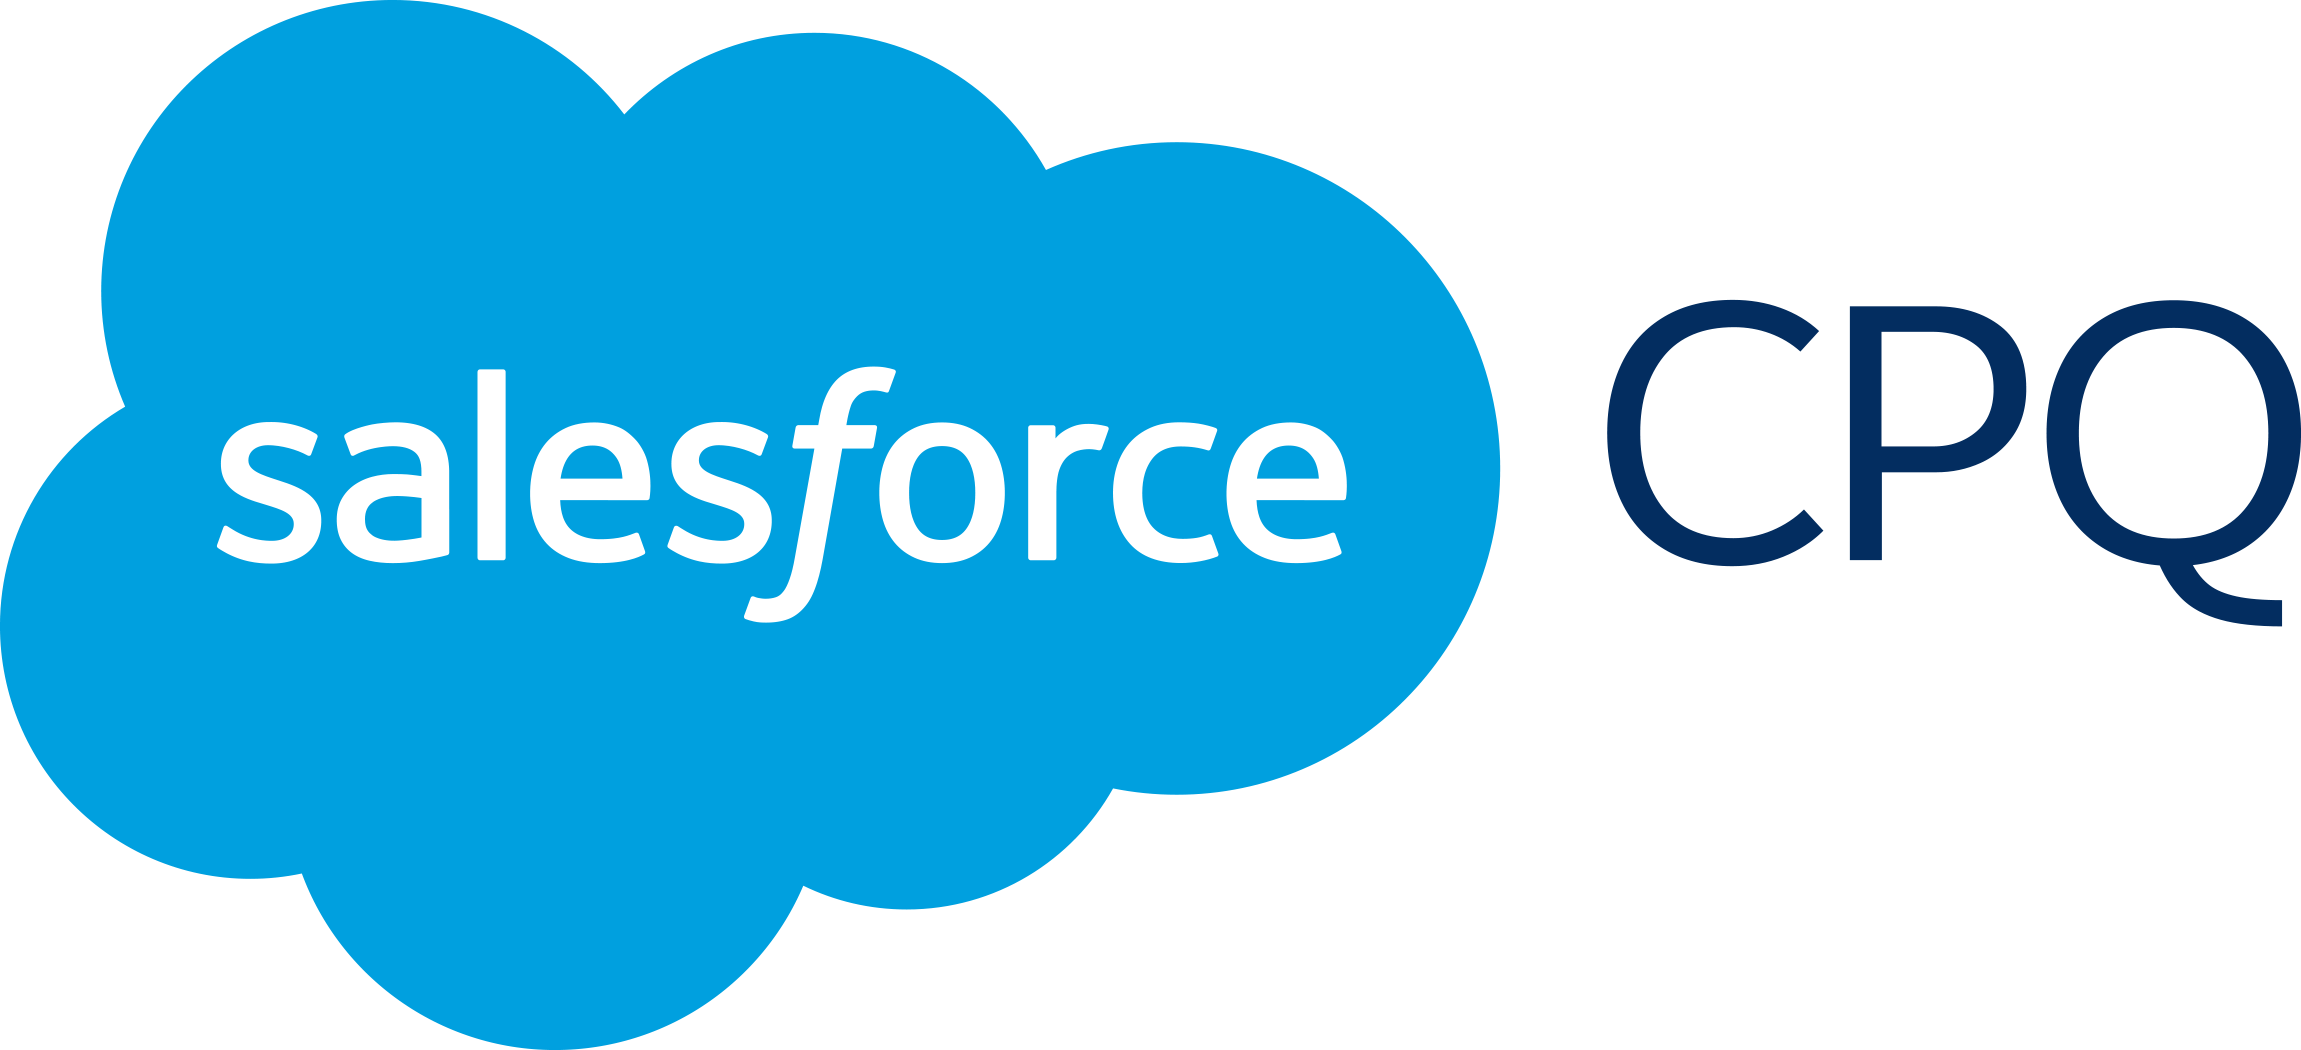 Salesforce CPQ & Billing Software 2022 Reviews, Pricing & Demo